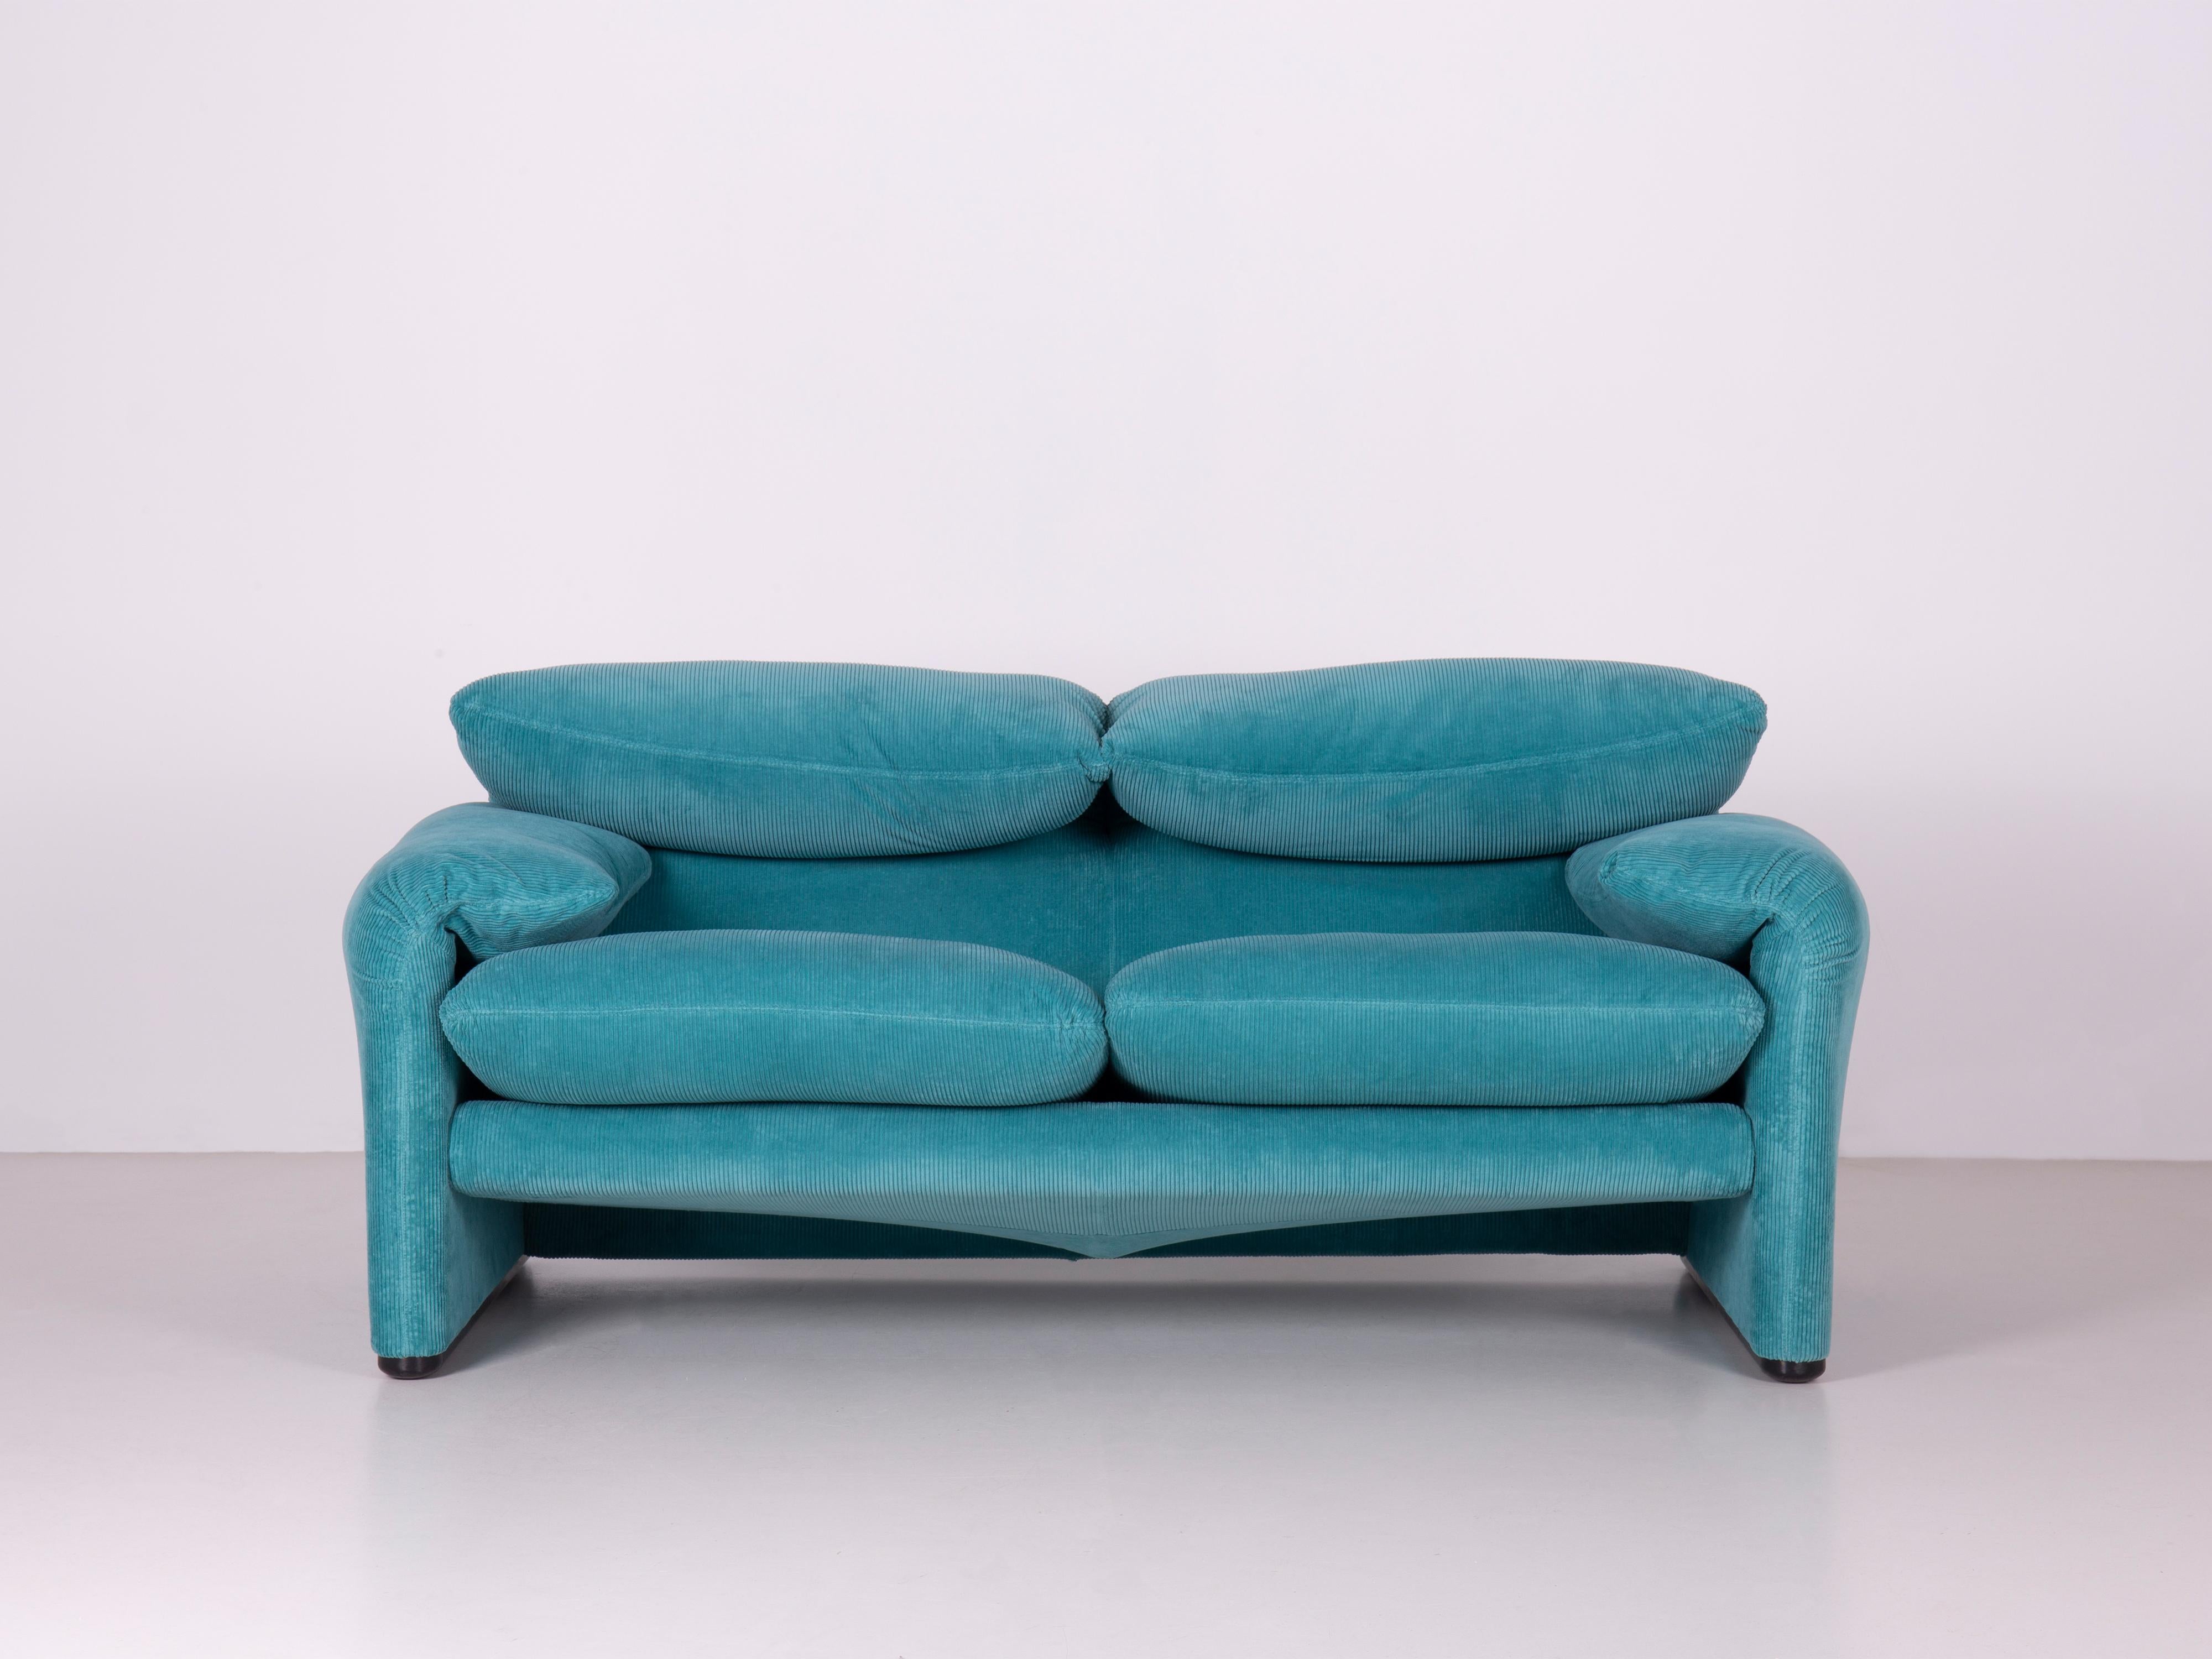 Fabric Maralunga 2 Seater Sofa by Vico Magistretti Upholstery in Ocean Green Corduroy For Sale